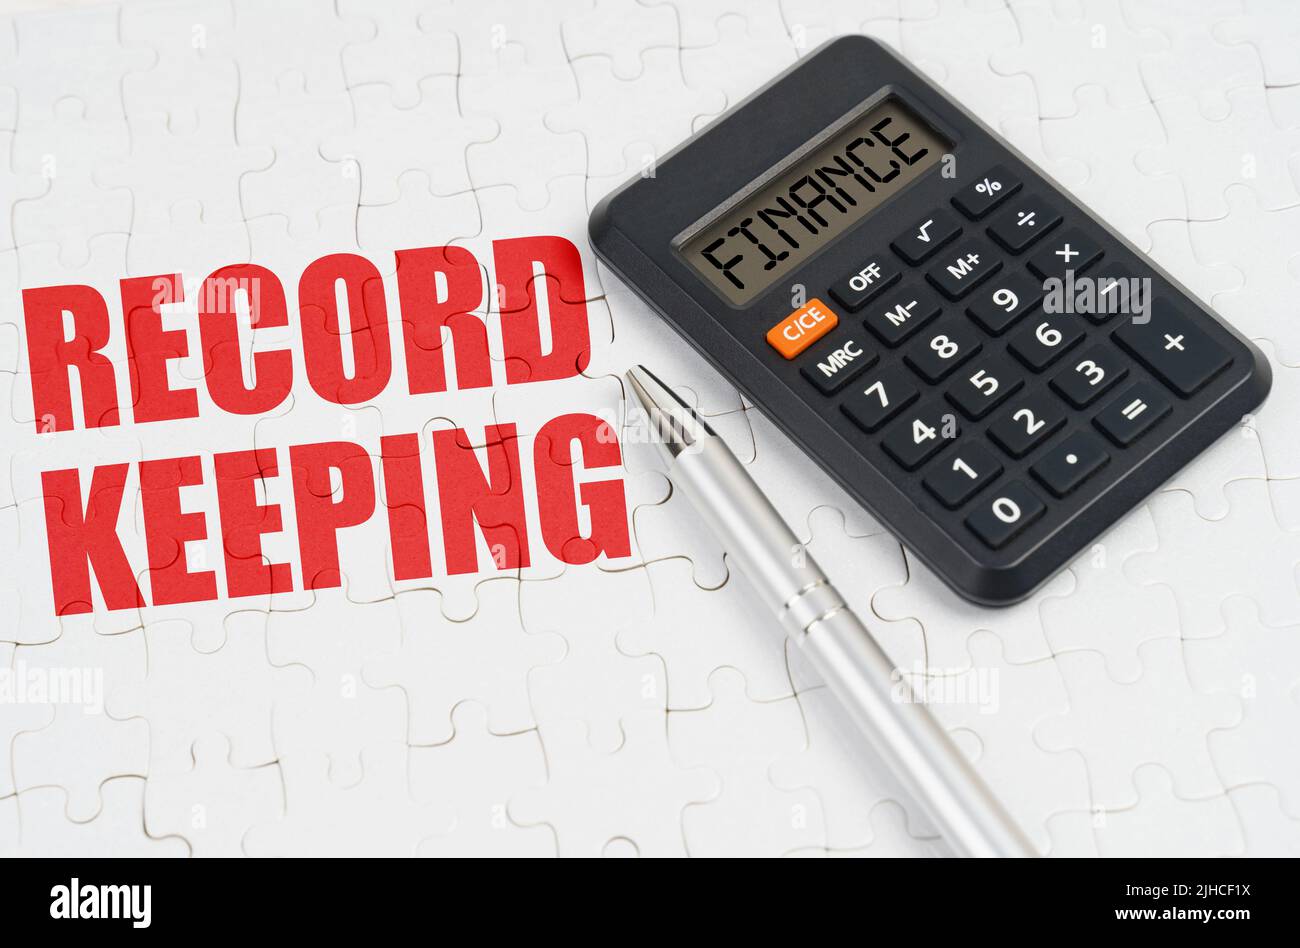 Business concept. On the puzzles lies a calculator and a pen, next to the inscription - Record keeping Stock Photo